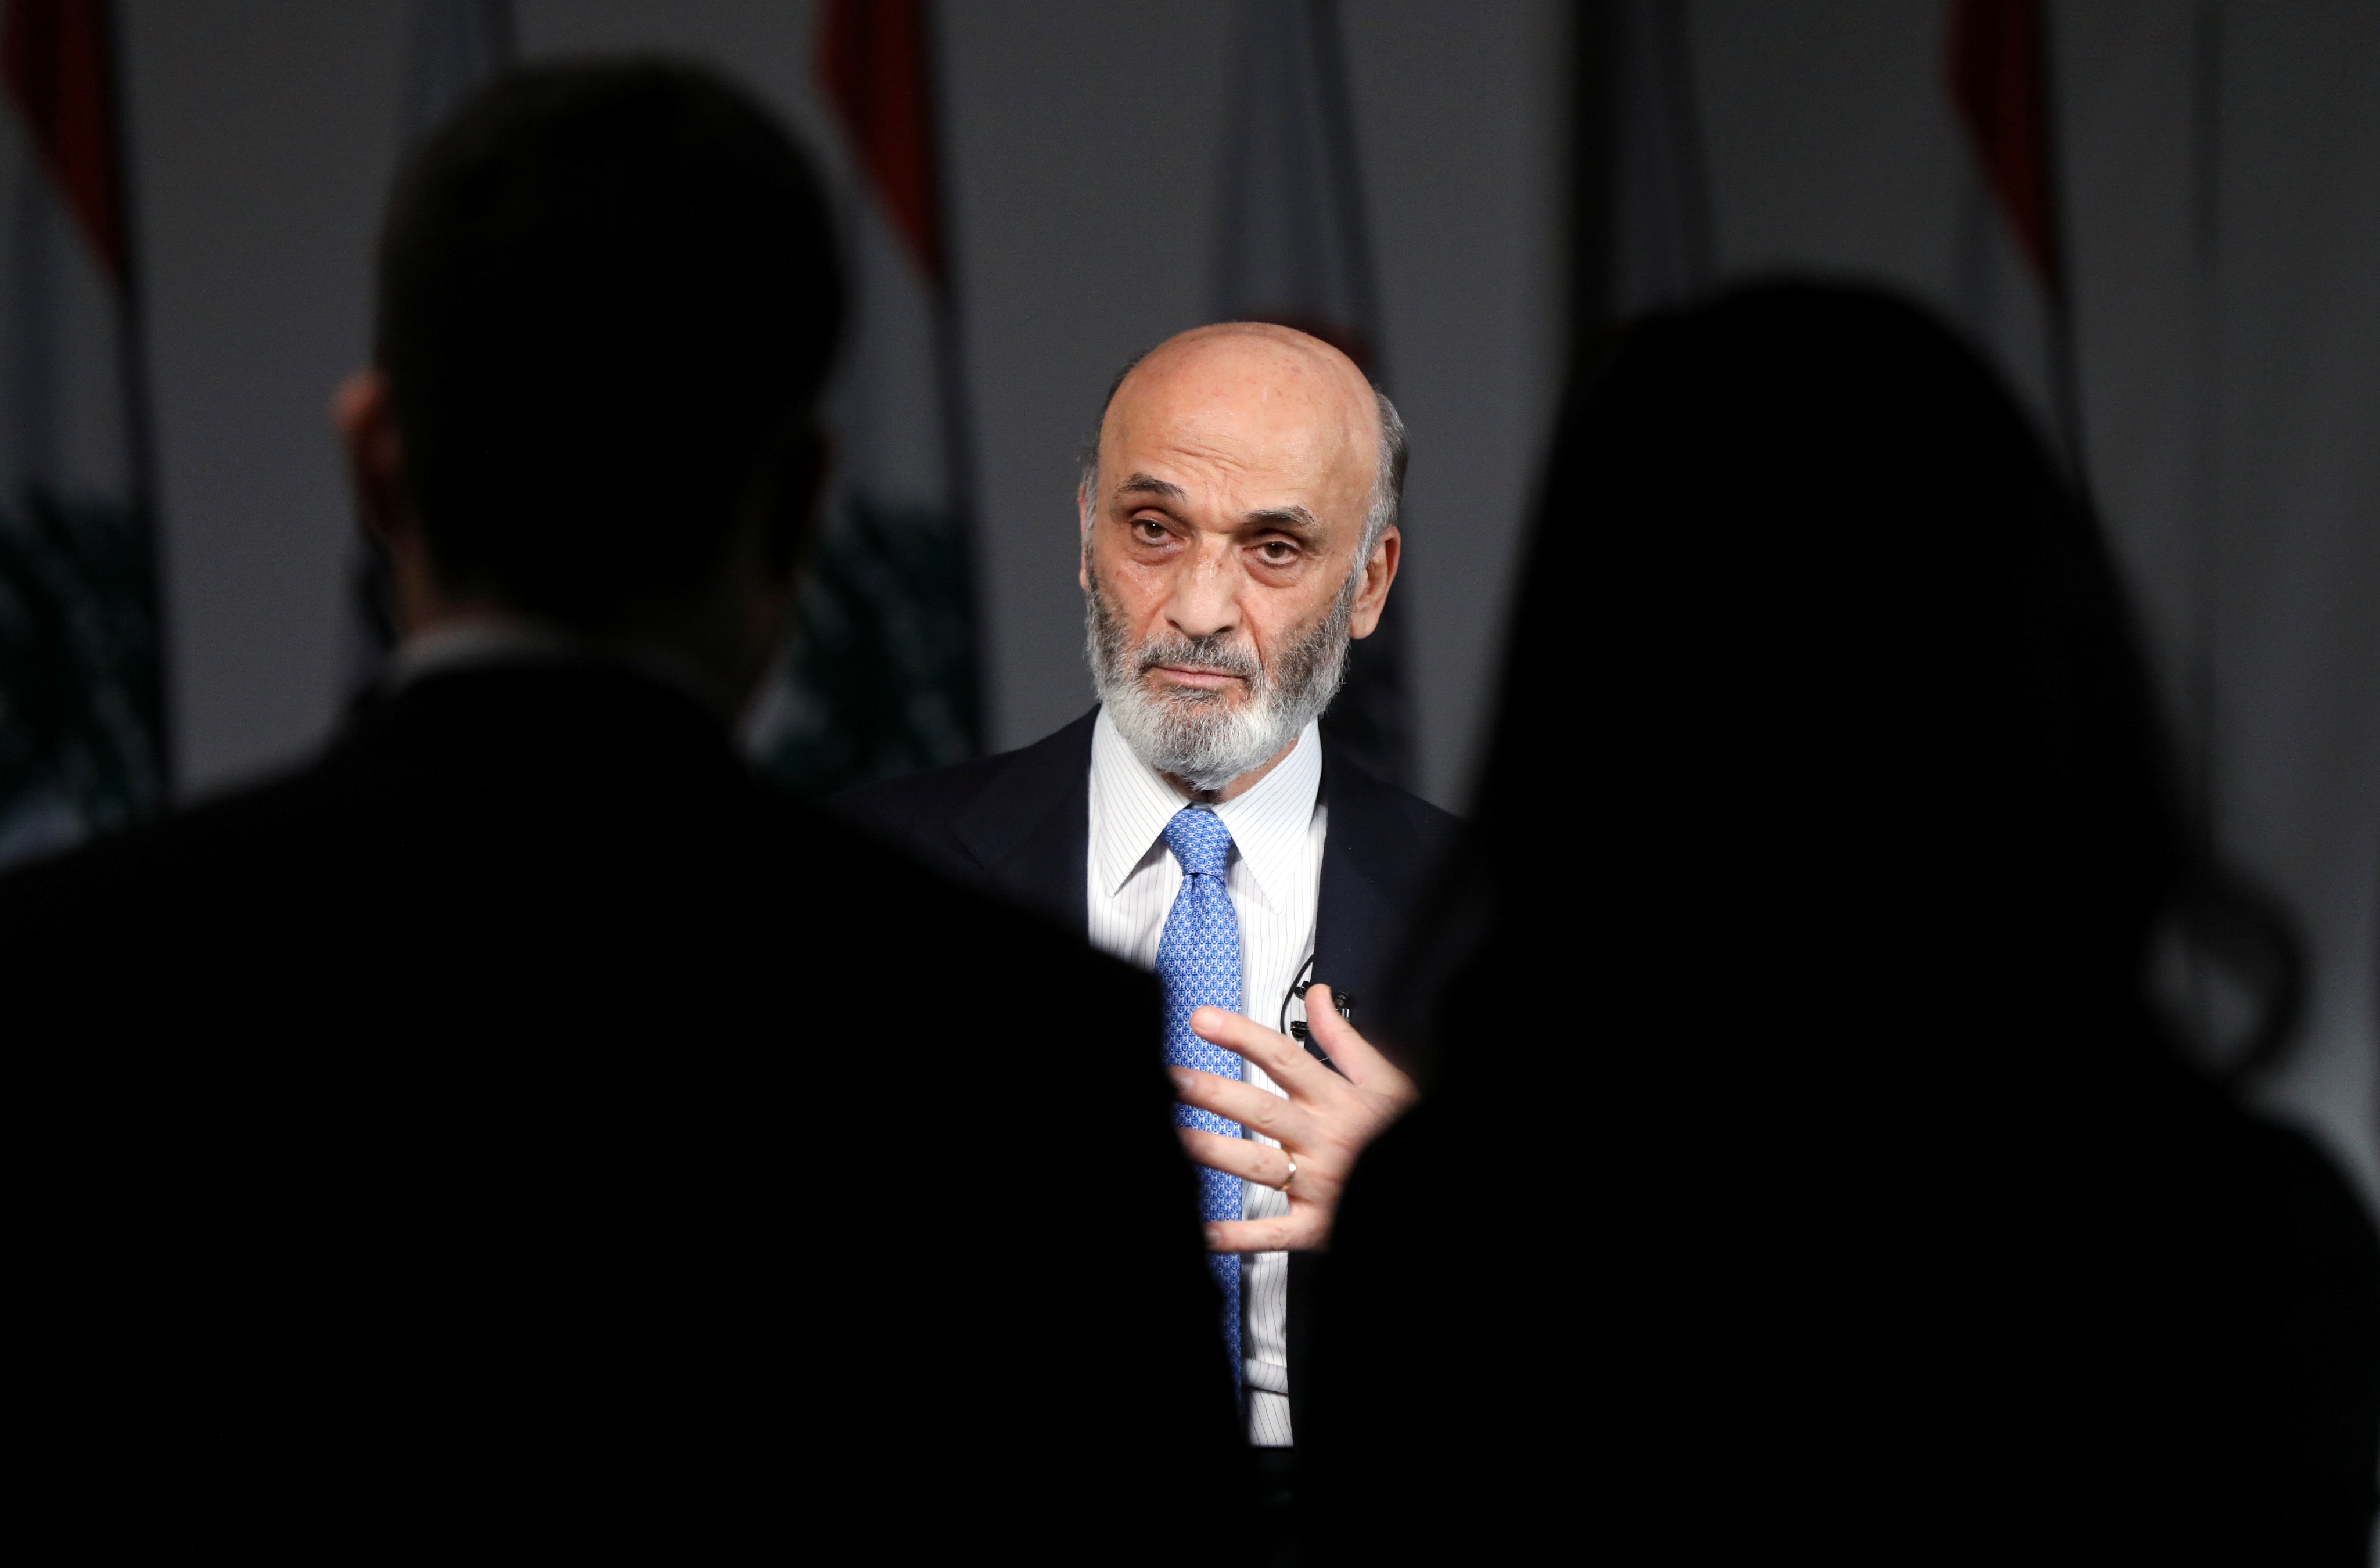 Samir Geagea, the leader of Lebanon's Christian Lebanese Forces (LF) party, speaks during an interview with Reuters at his residence in Maarab, Lebanon November 29, 2021.  REUTERS/Mohamed Azakir